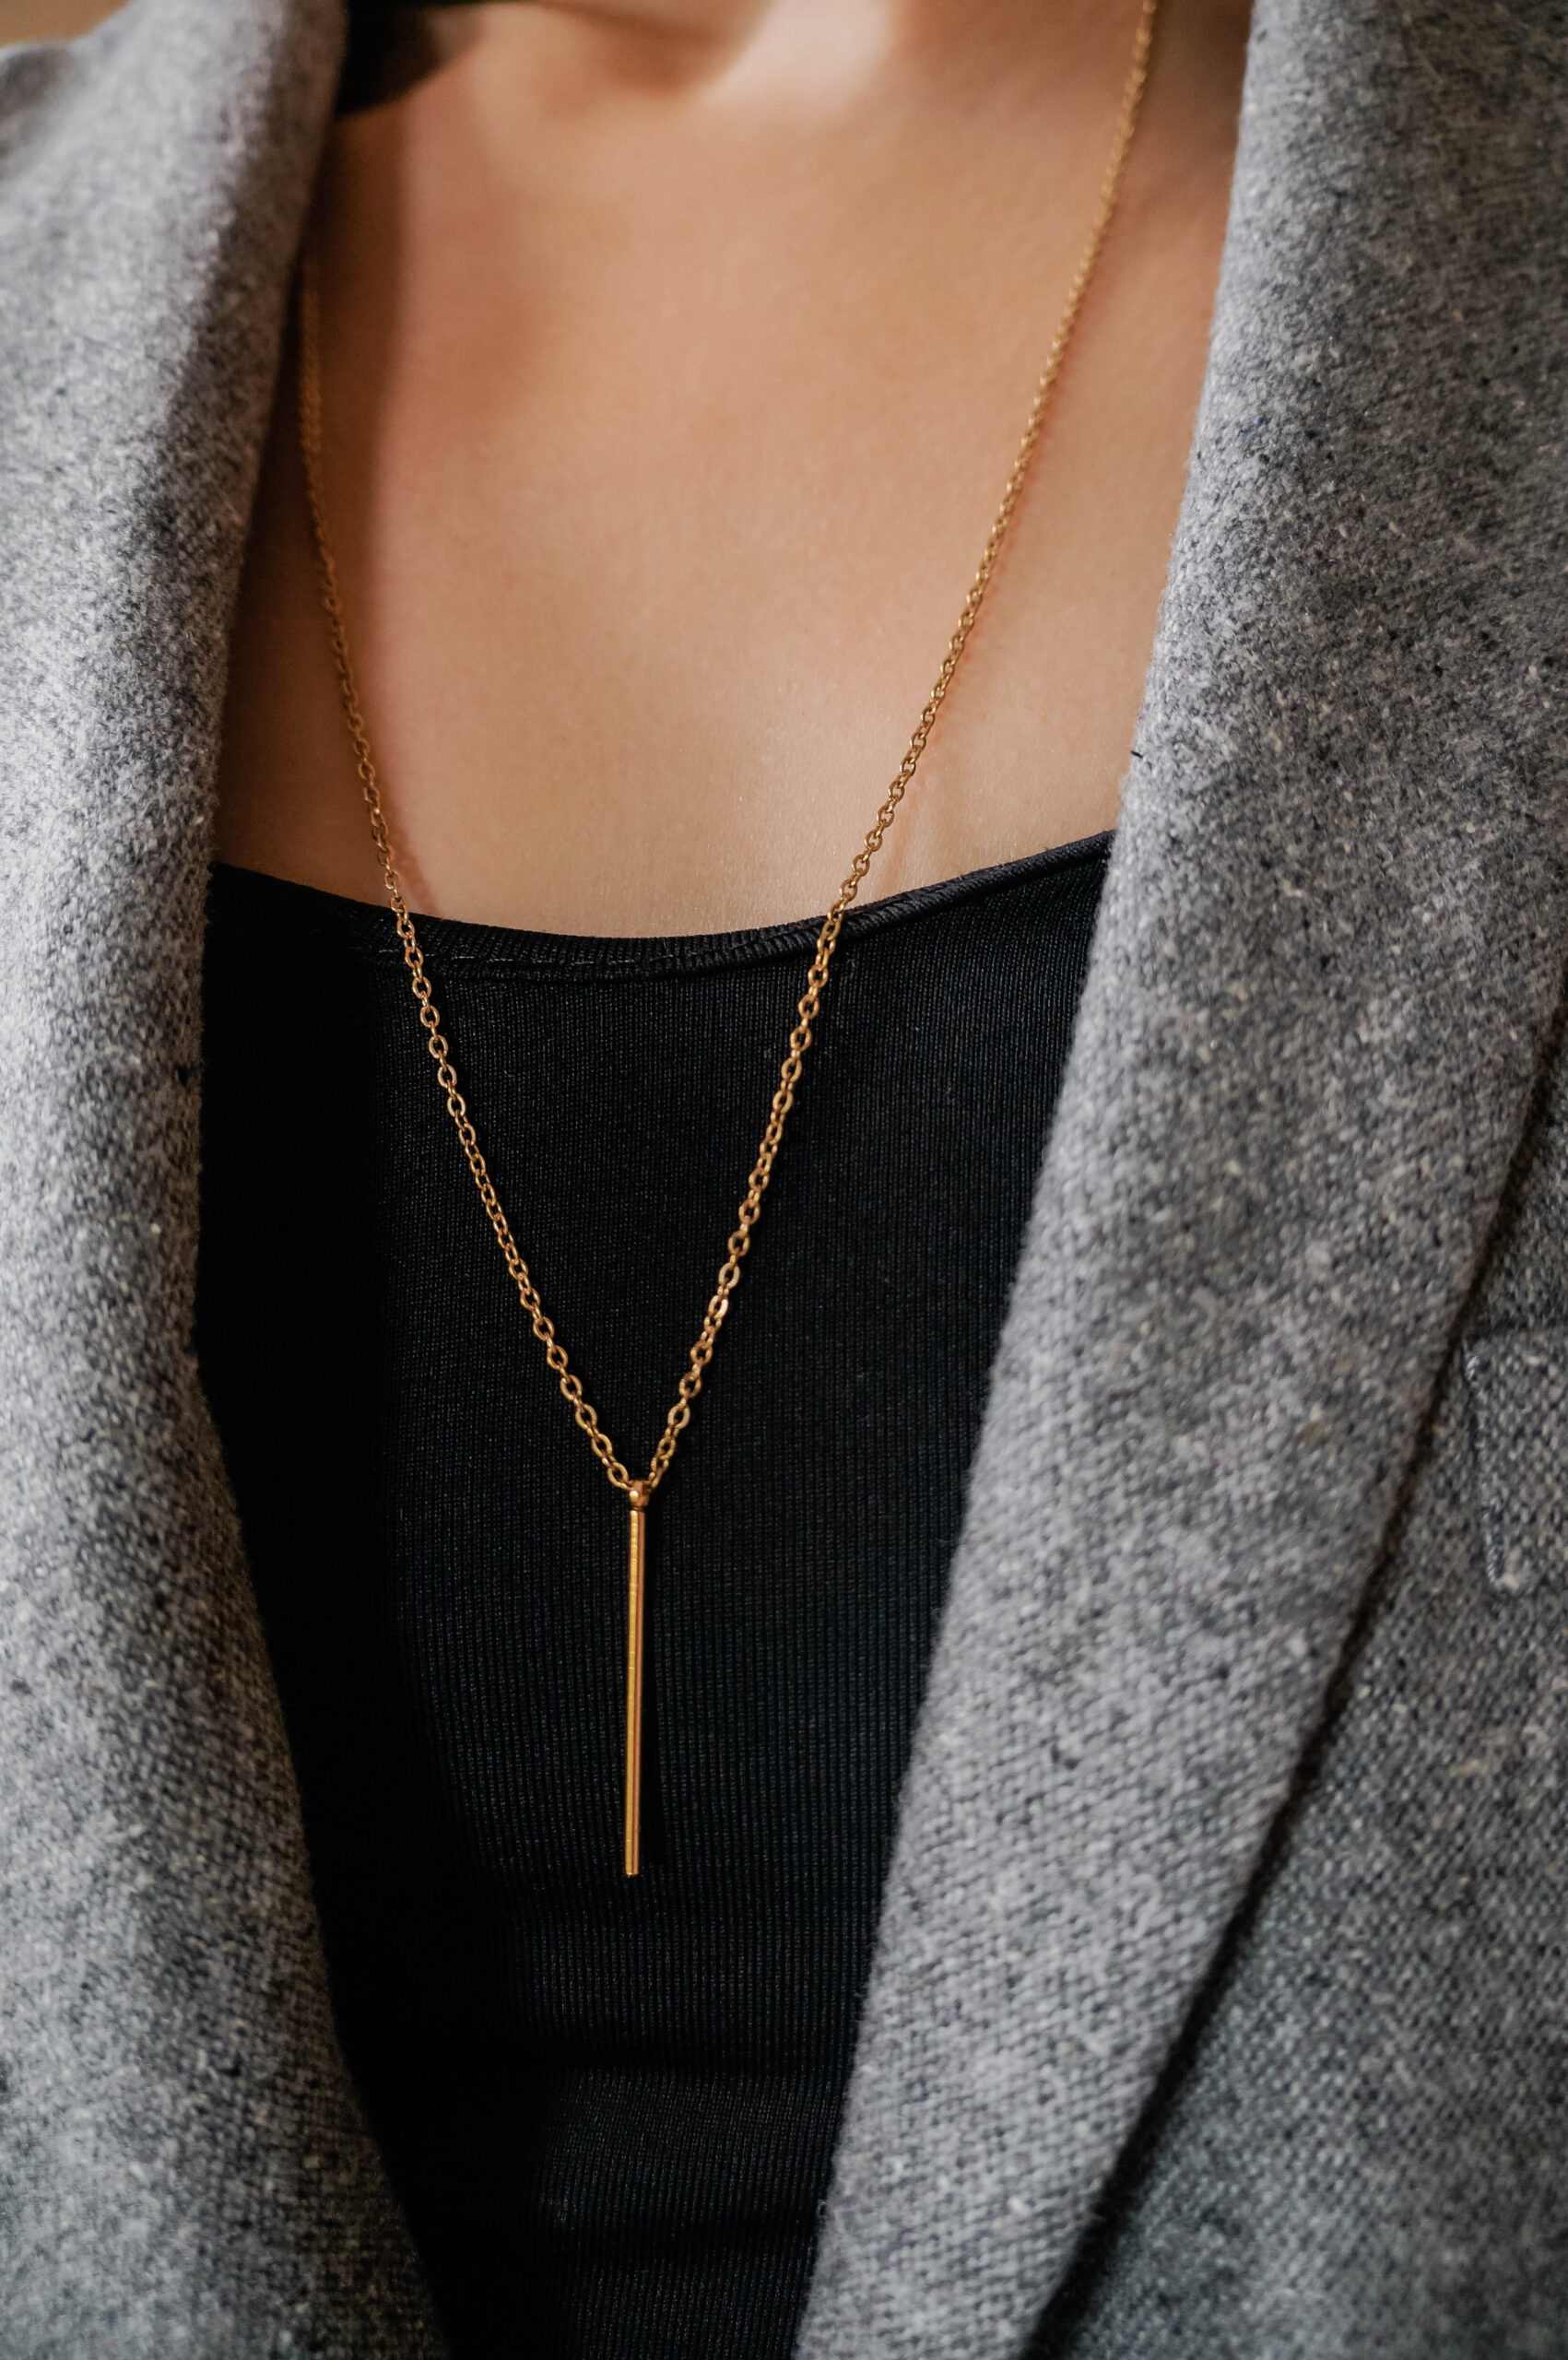 Unisex long chain necklace in gold